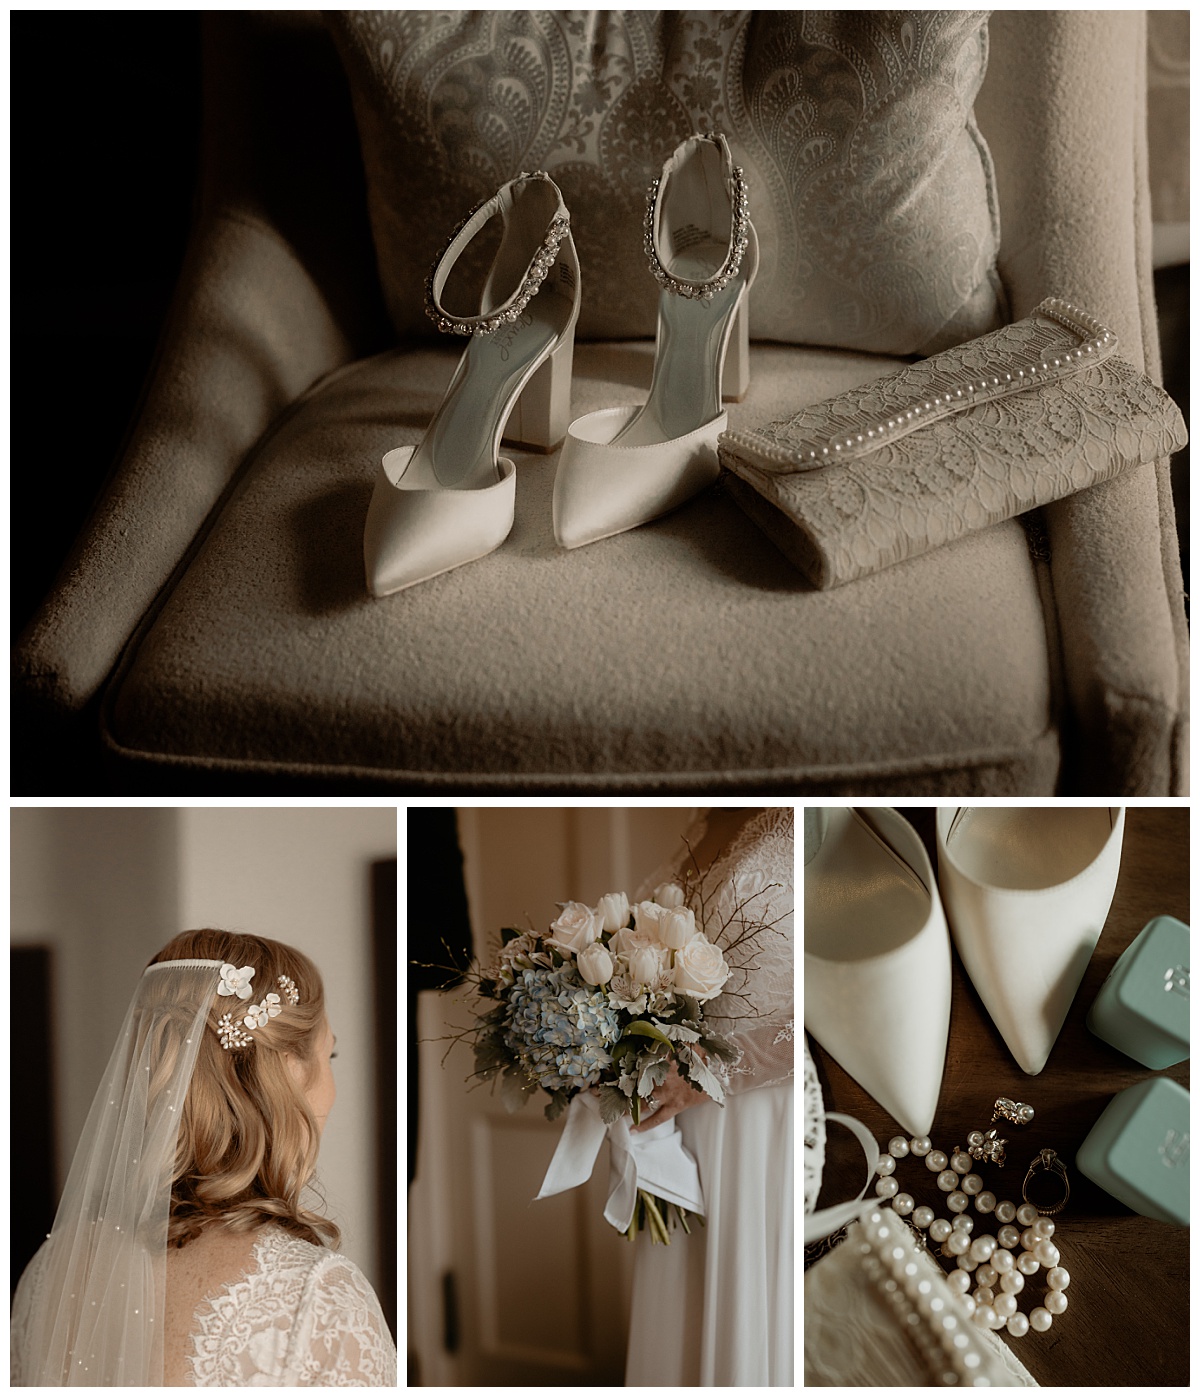 bridal details with shoes, purse, jewelry, and florals at intimate estate ceremony 